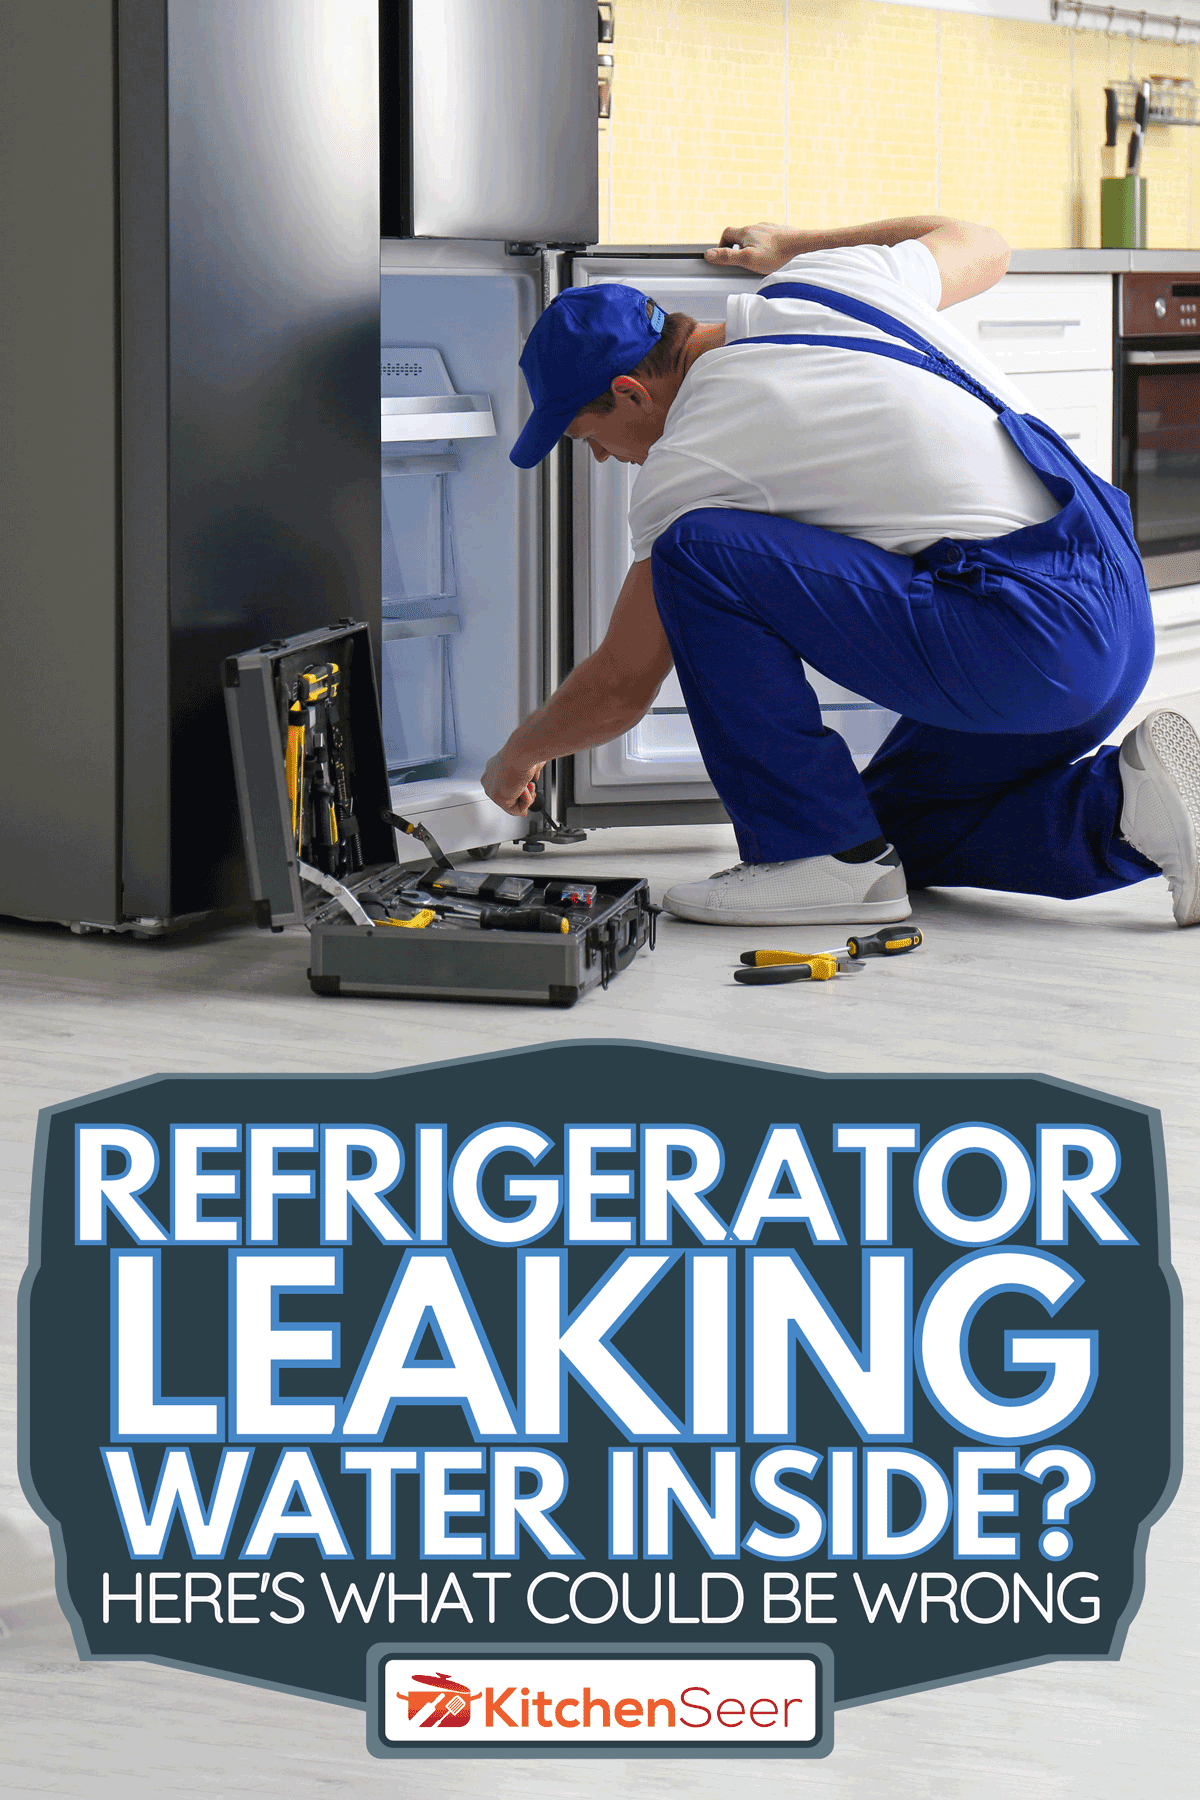 A male technician repairing broken refrigerator in kitchen, Refrigerator Leaking Water Inside? Here's What Could Be Wrong